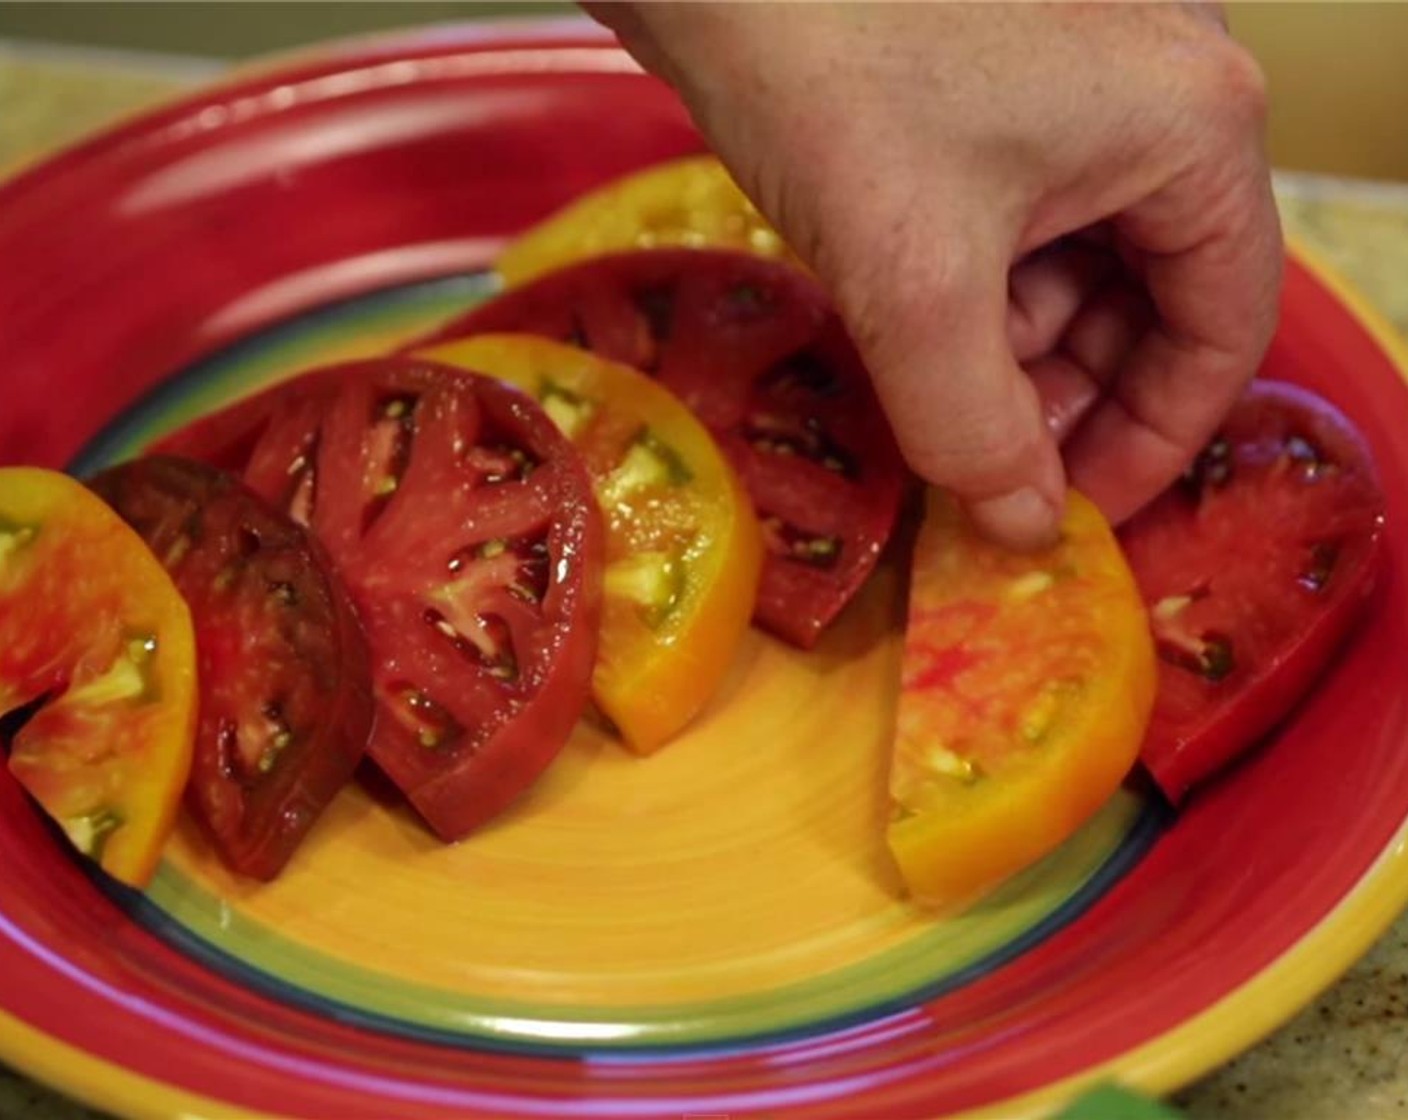 step 6 Overlap tomatoes on a large platter or individual salad plates (alternating colors if using red & yellow varieties), with a thin slice of mozzarella between slices.